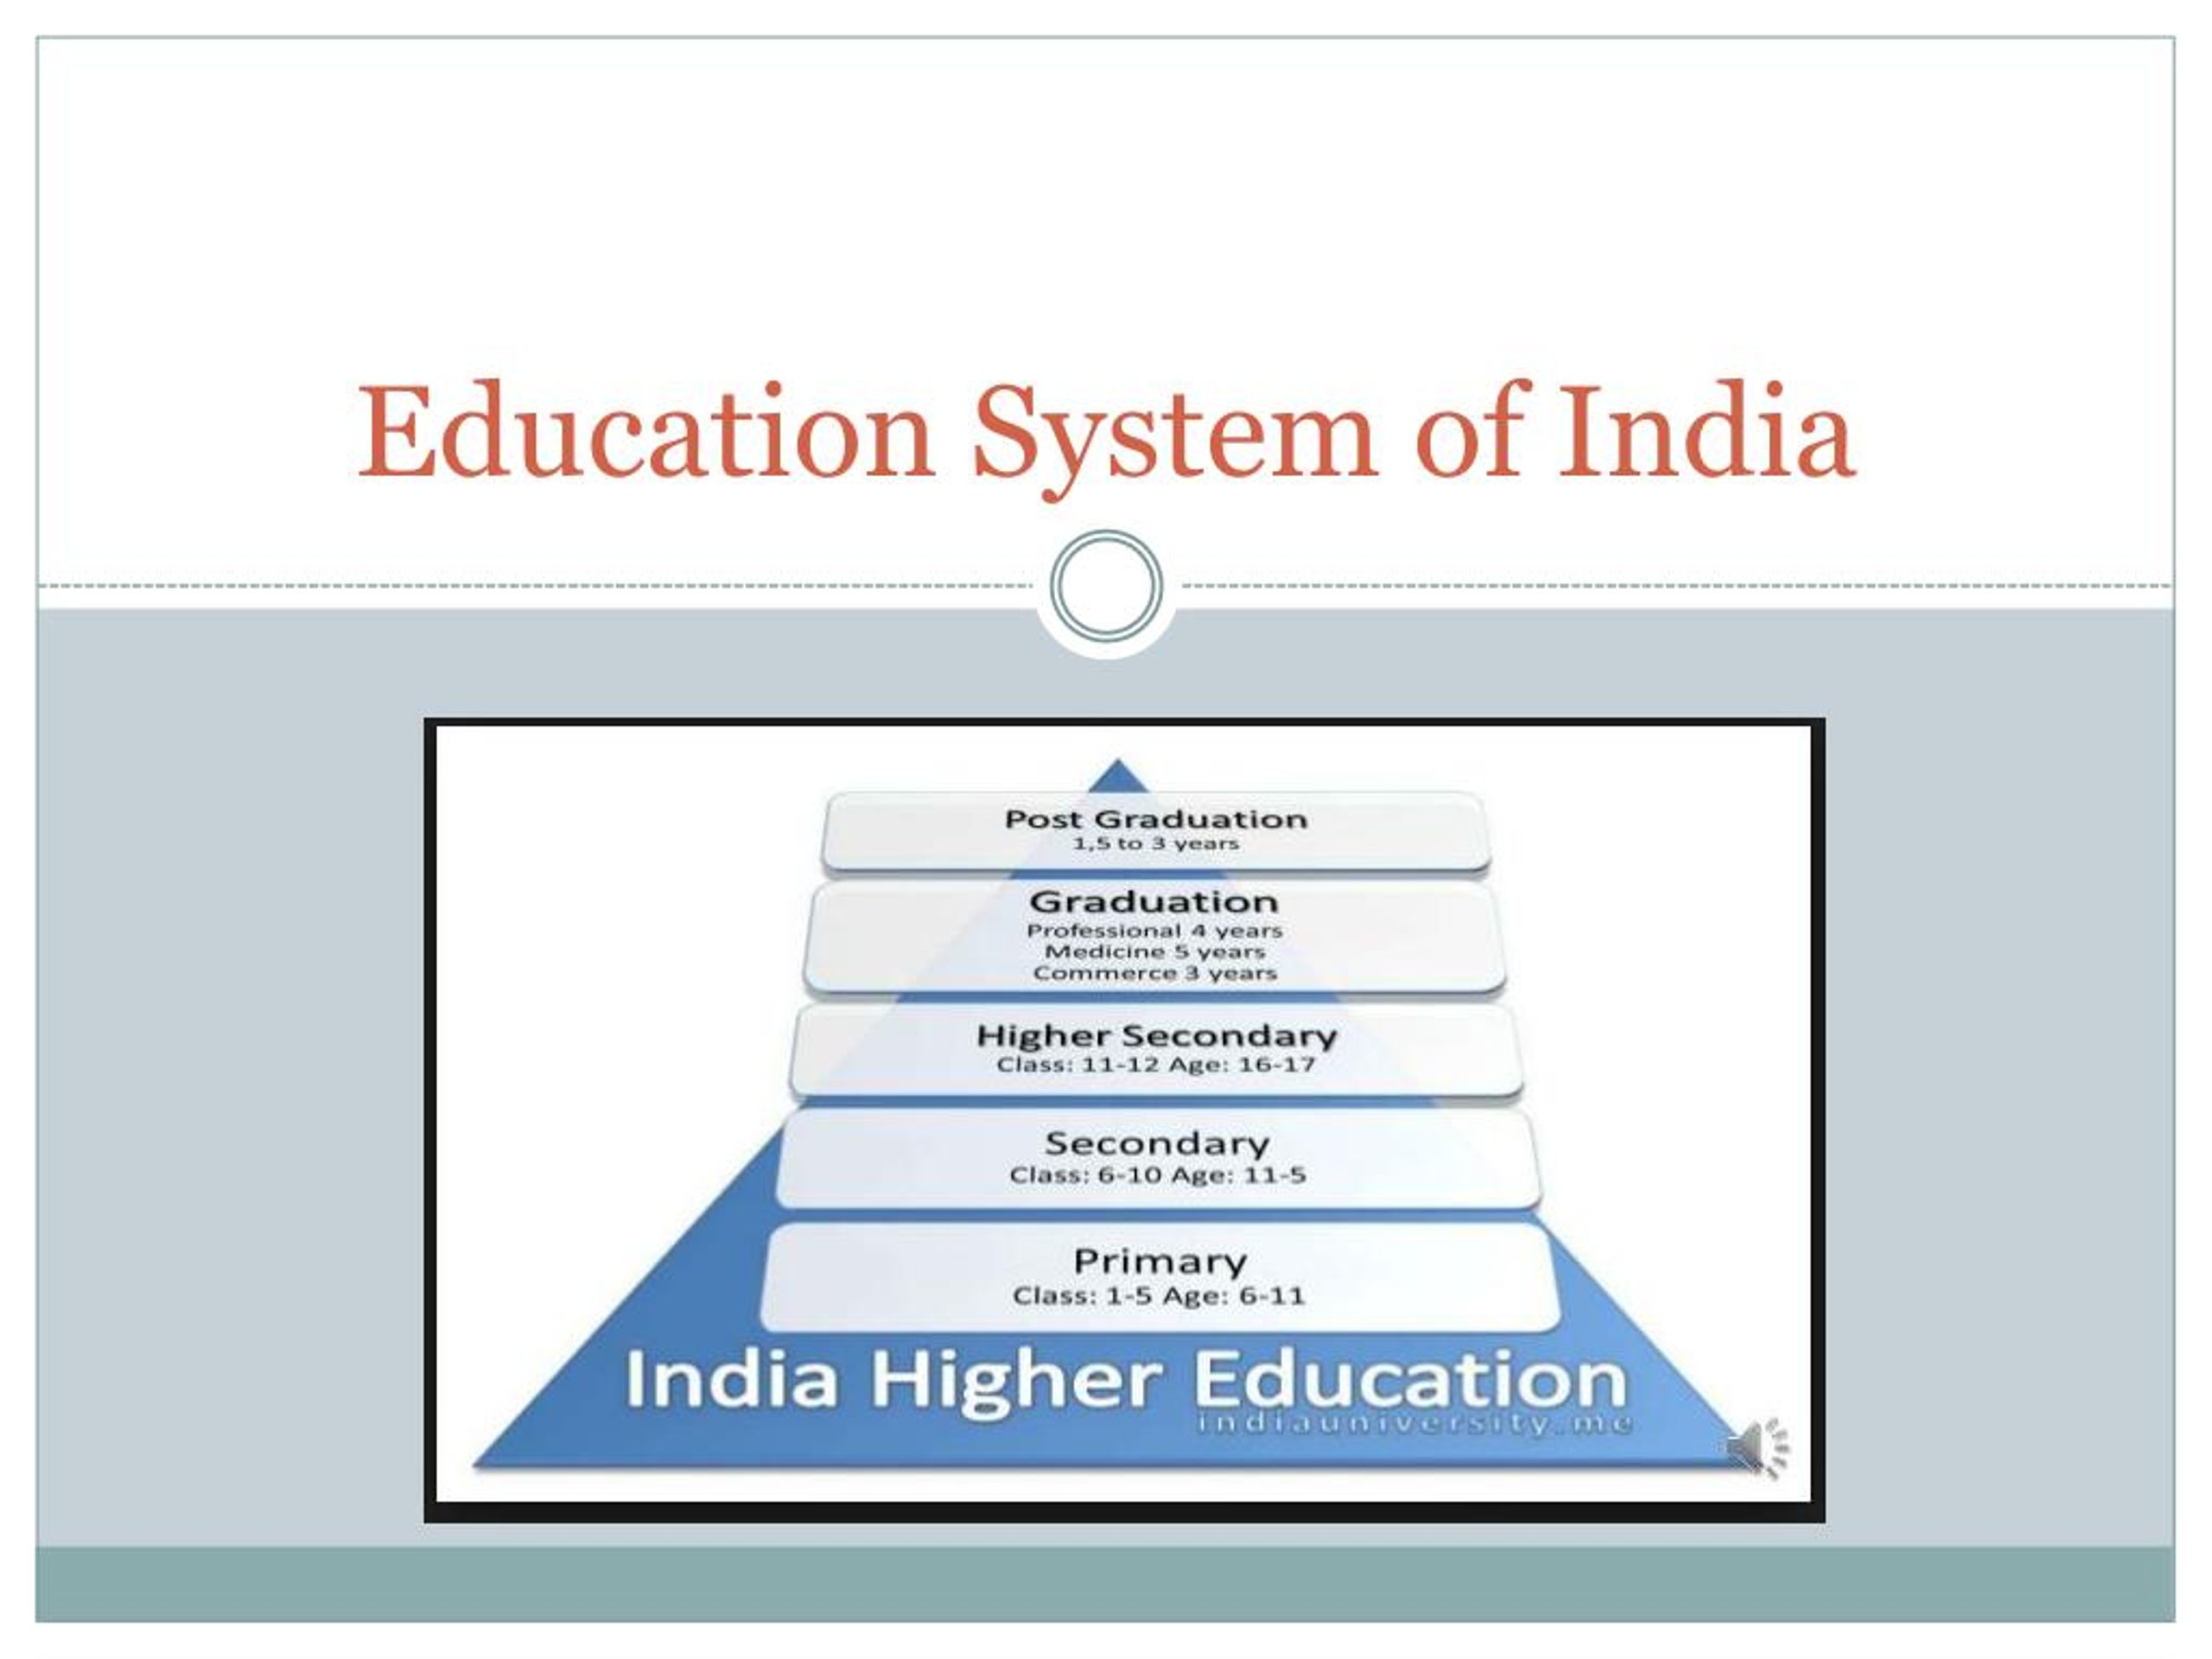 ppt on education in india